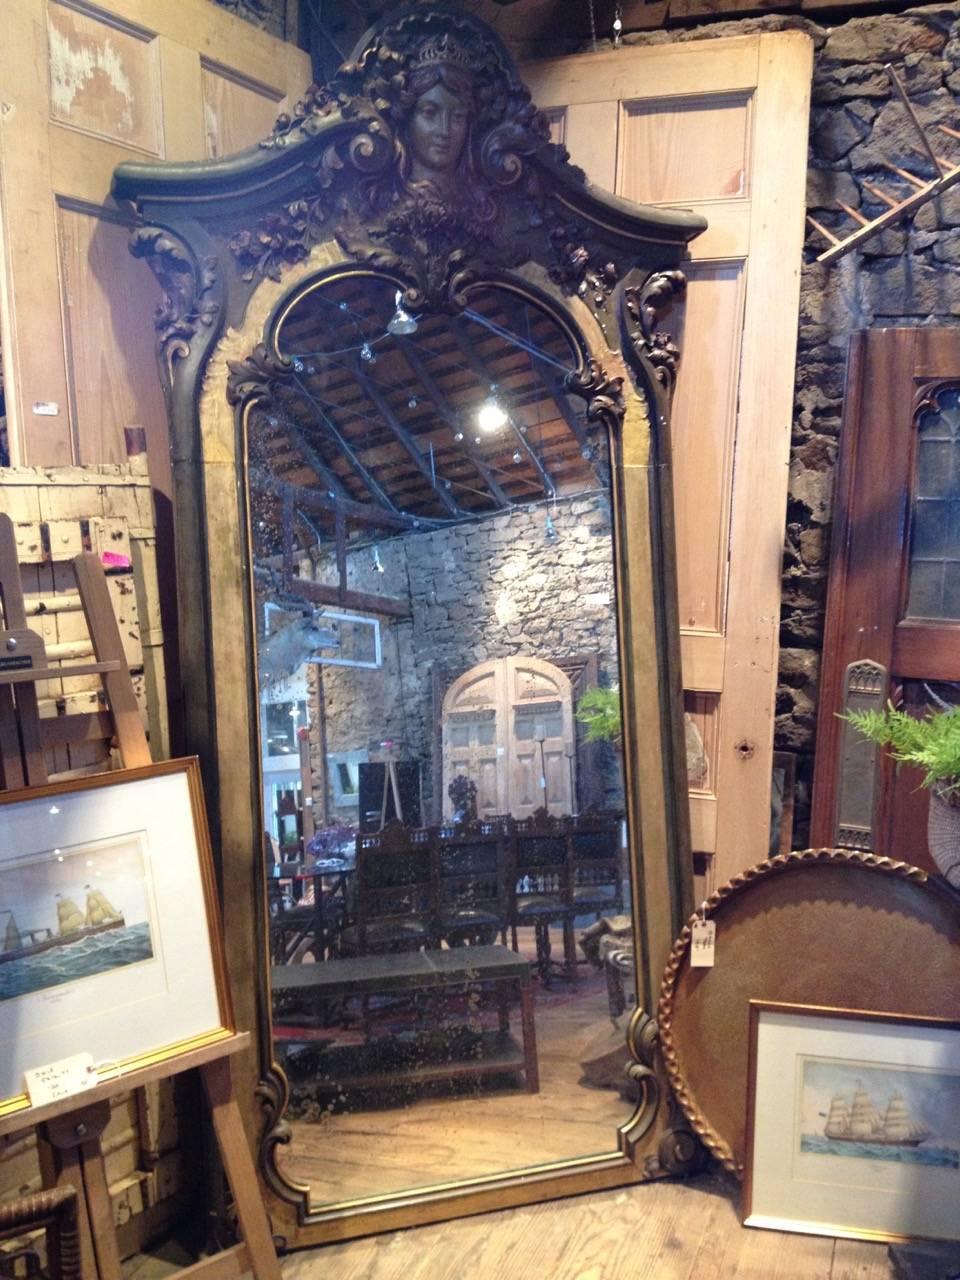 Monumental carved Italian mirror, circa 1900. Gesso over wood with original mirror. Has a gilt border with muted paint colors in bluish green with gold and brown highlights. Weighs approximately 300 lbs. 3 inches deep except for the top which is 8